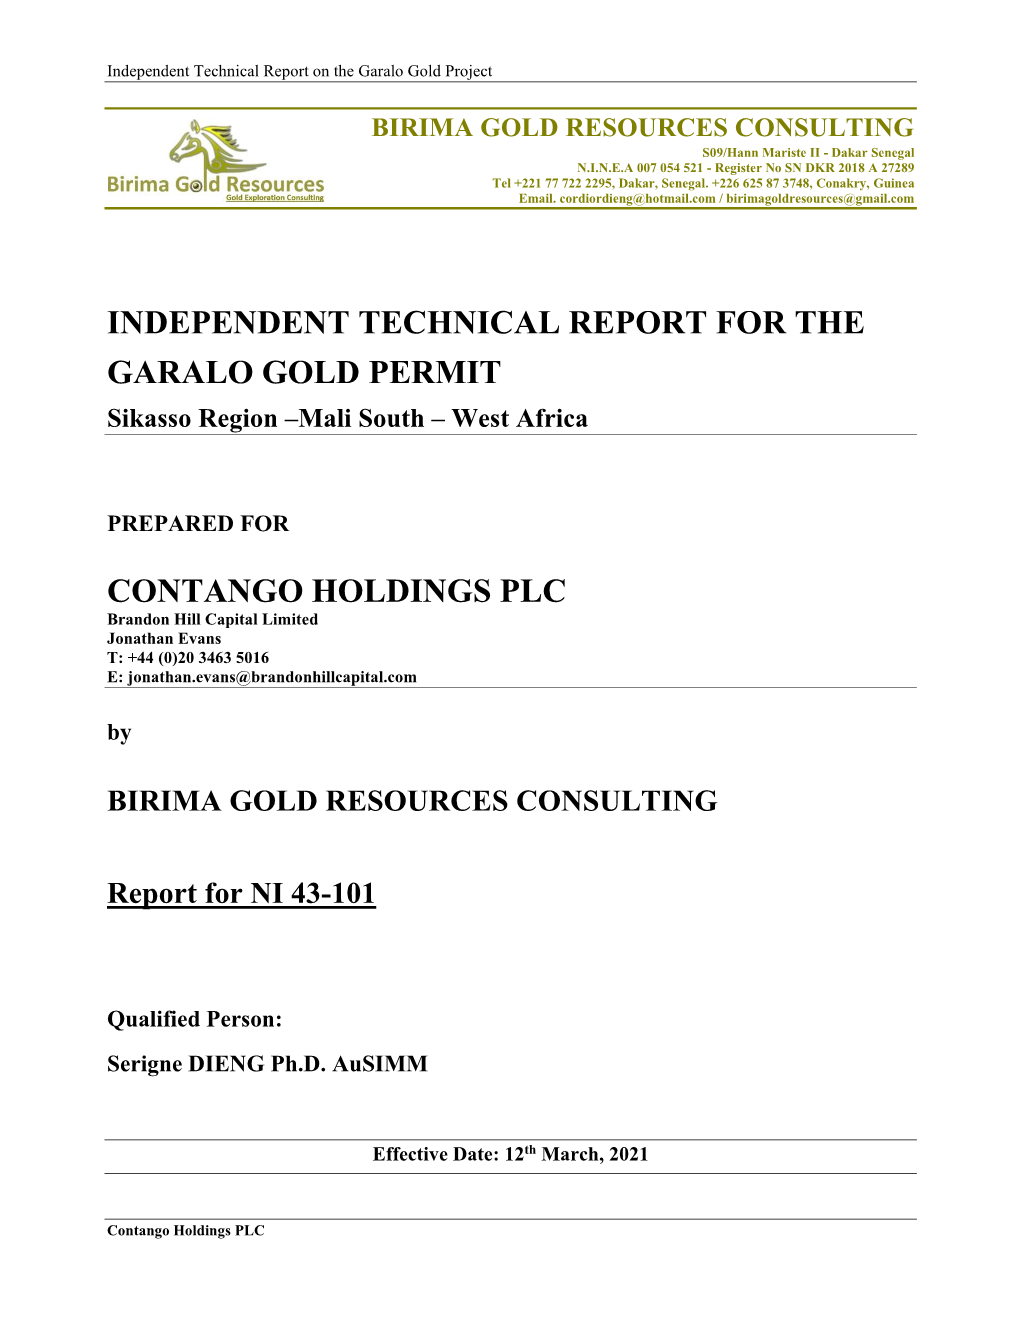 Independent Technical Report for the Garalo Gold Permit Contango Holdings